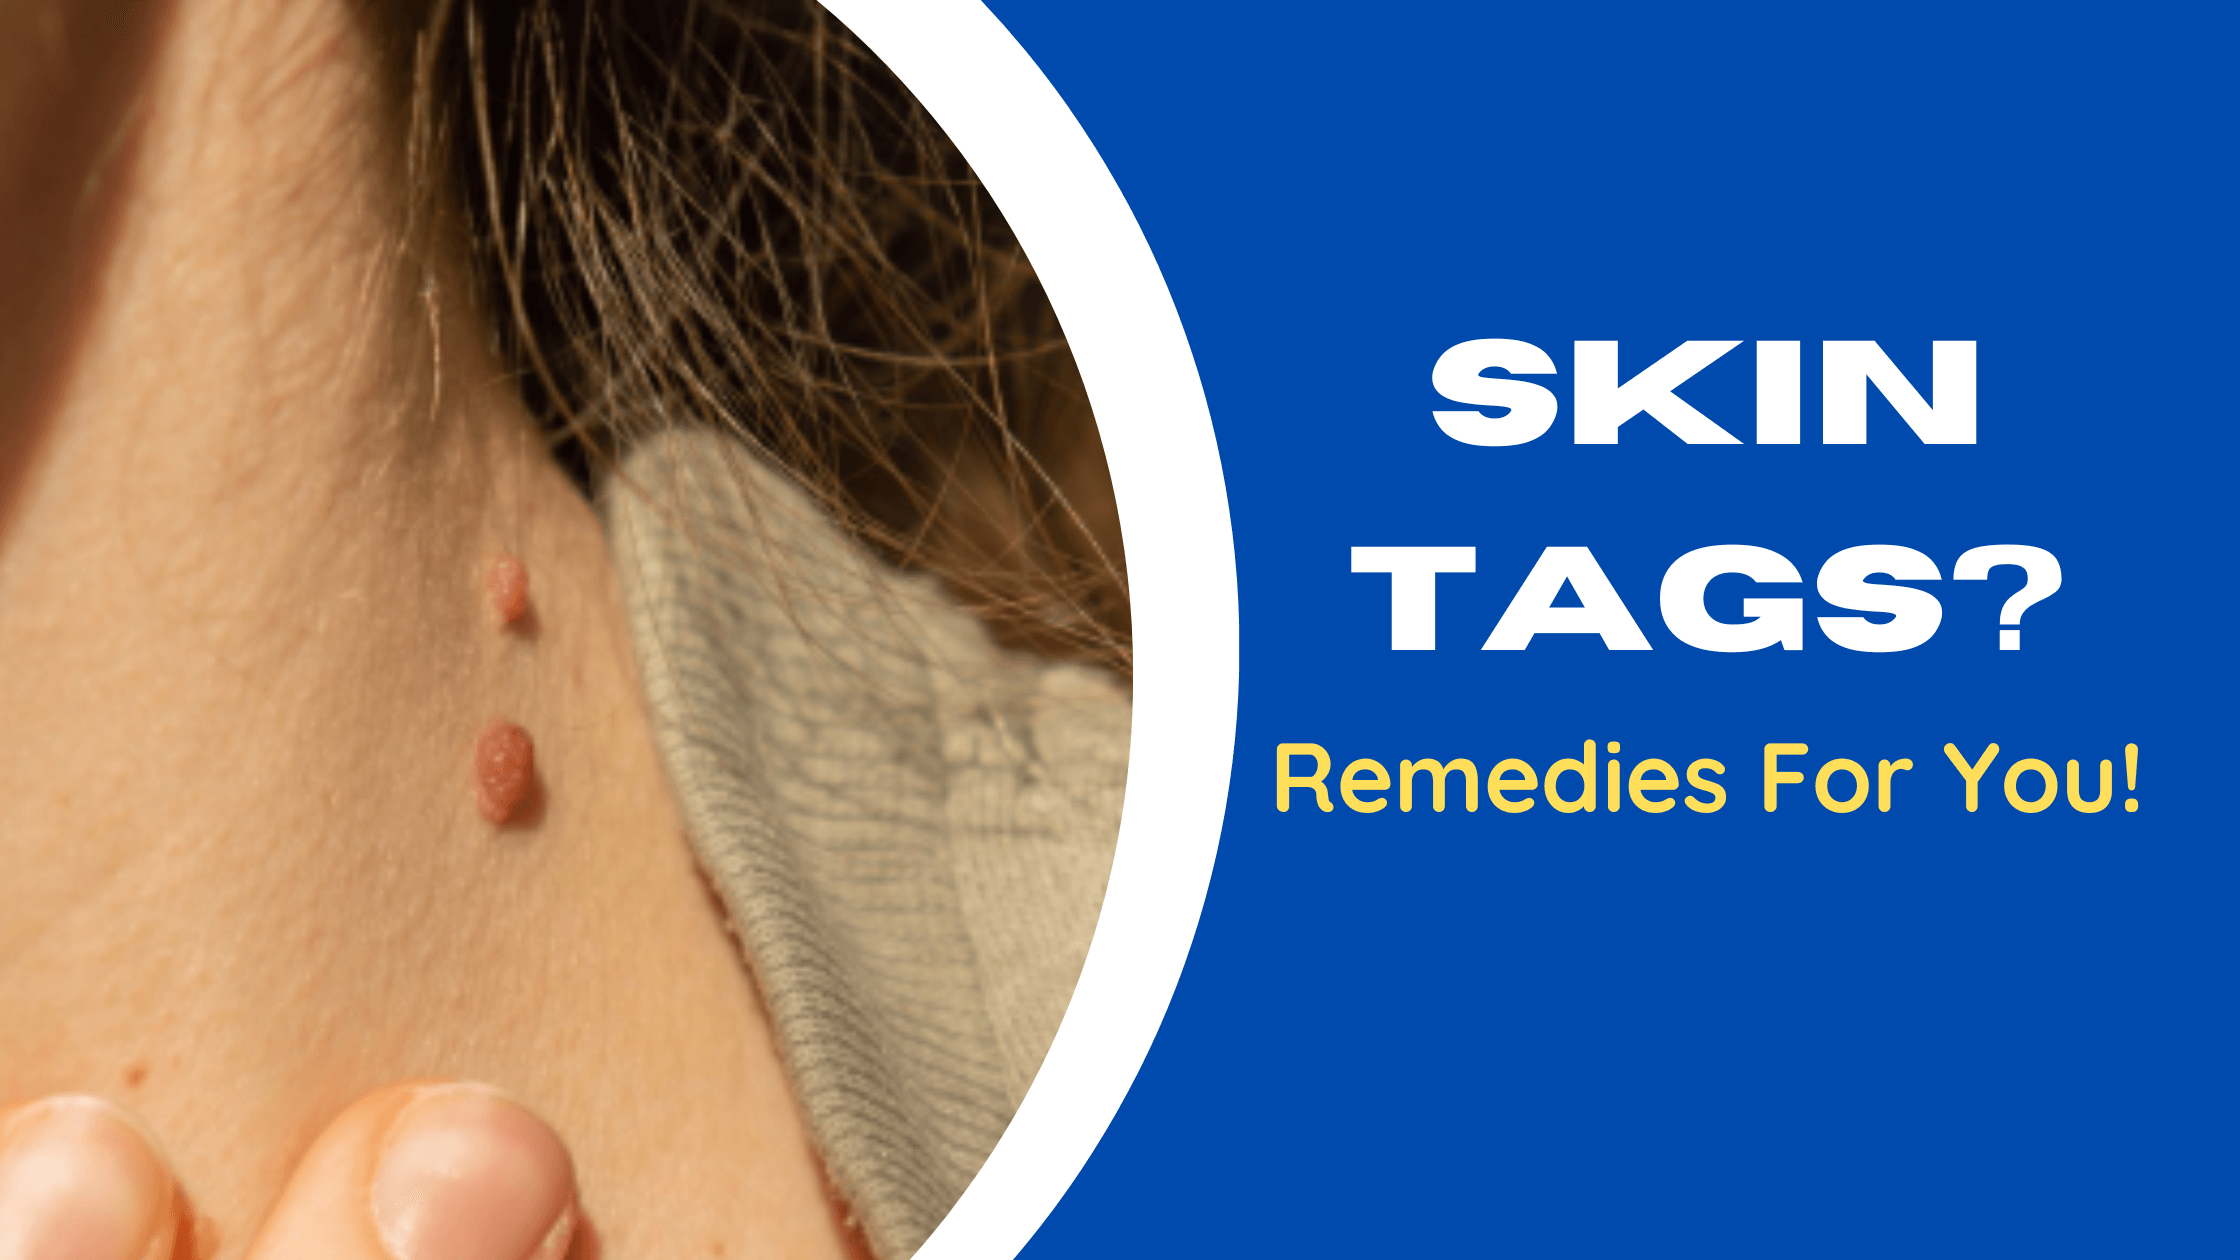 How To Get Rid Of Skin Tags